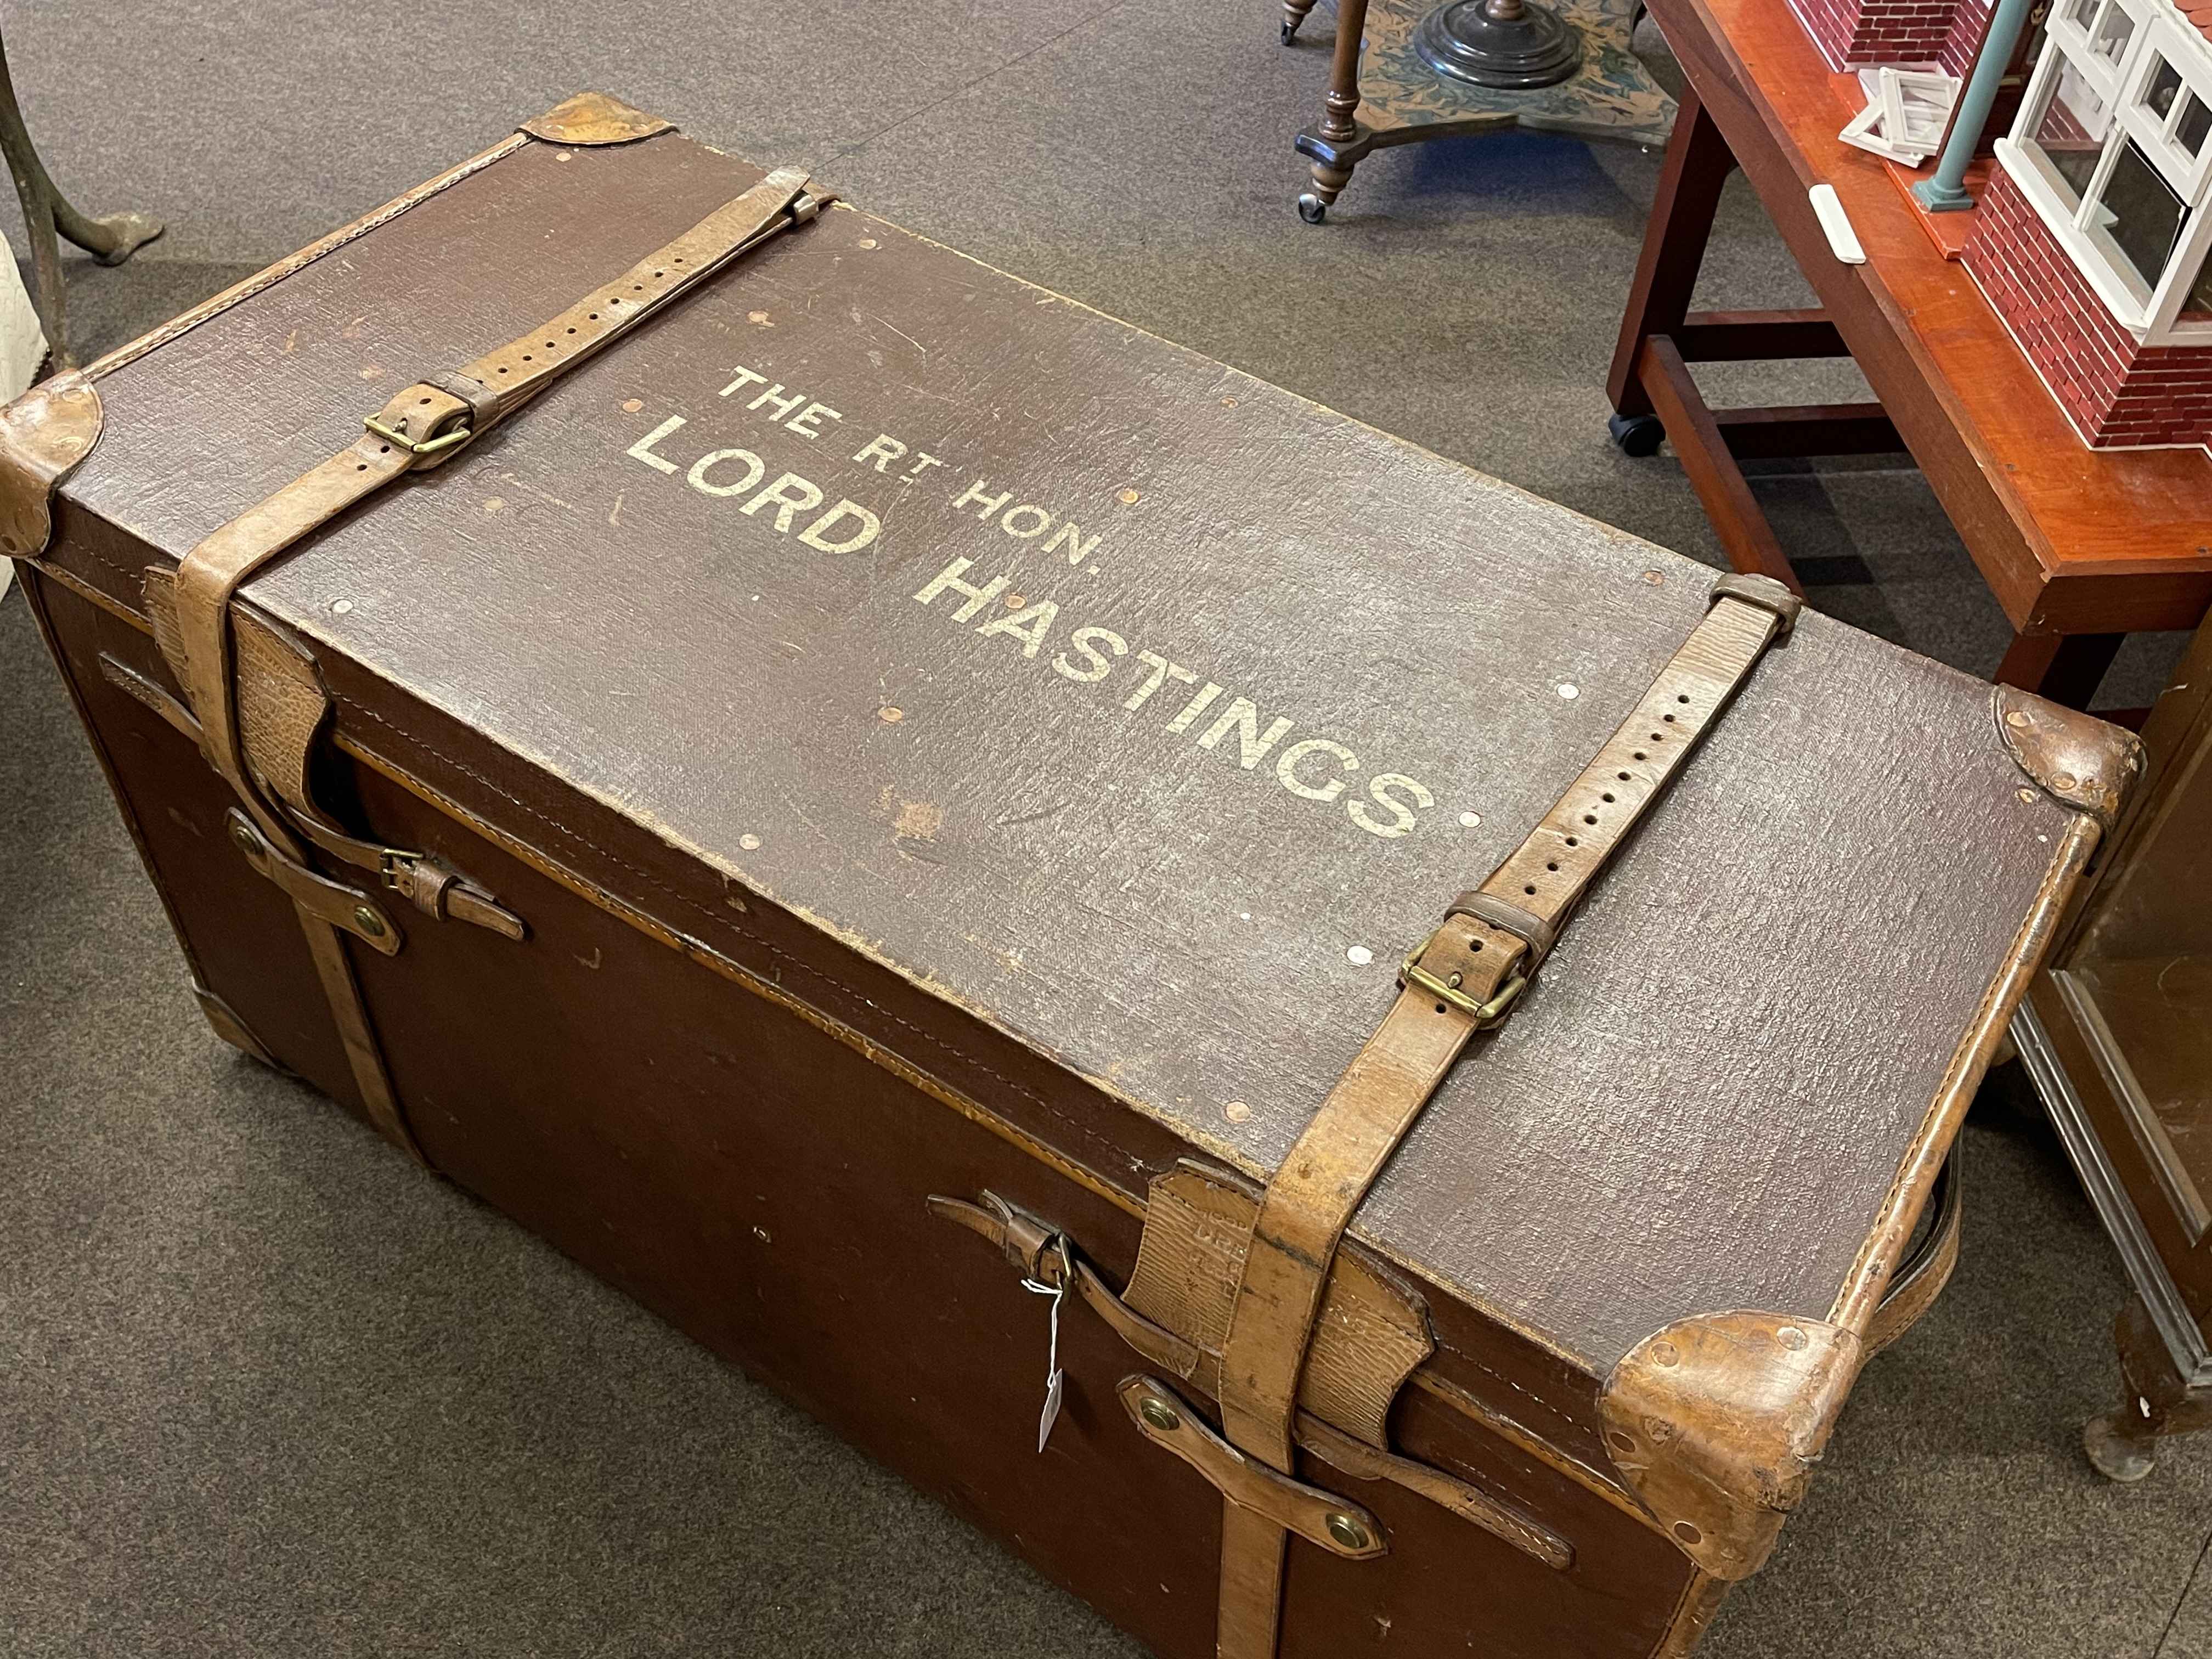 Drew & Sons Piccadilly Circus wood fibre and leather bound travelling trunk with reference to the - Image 2 of 3